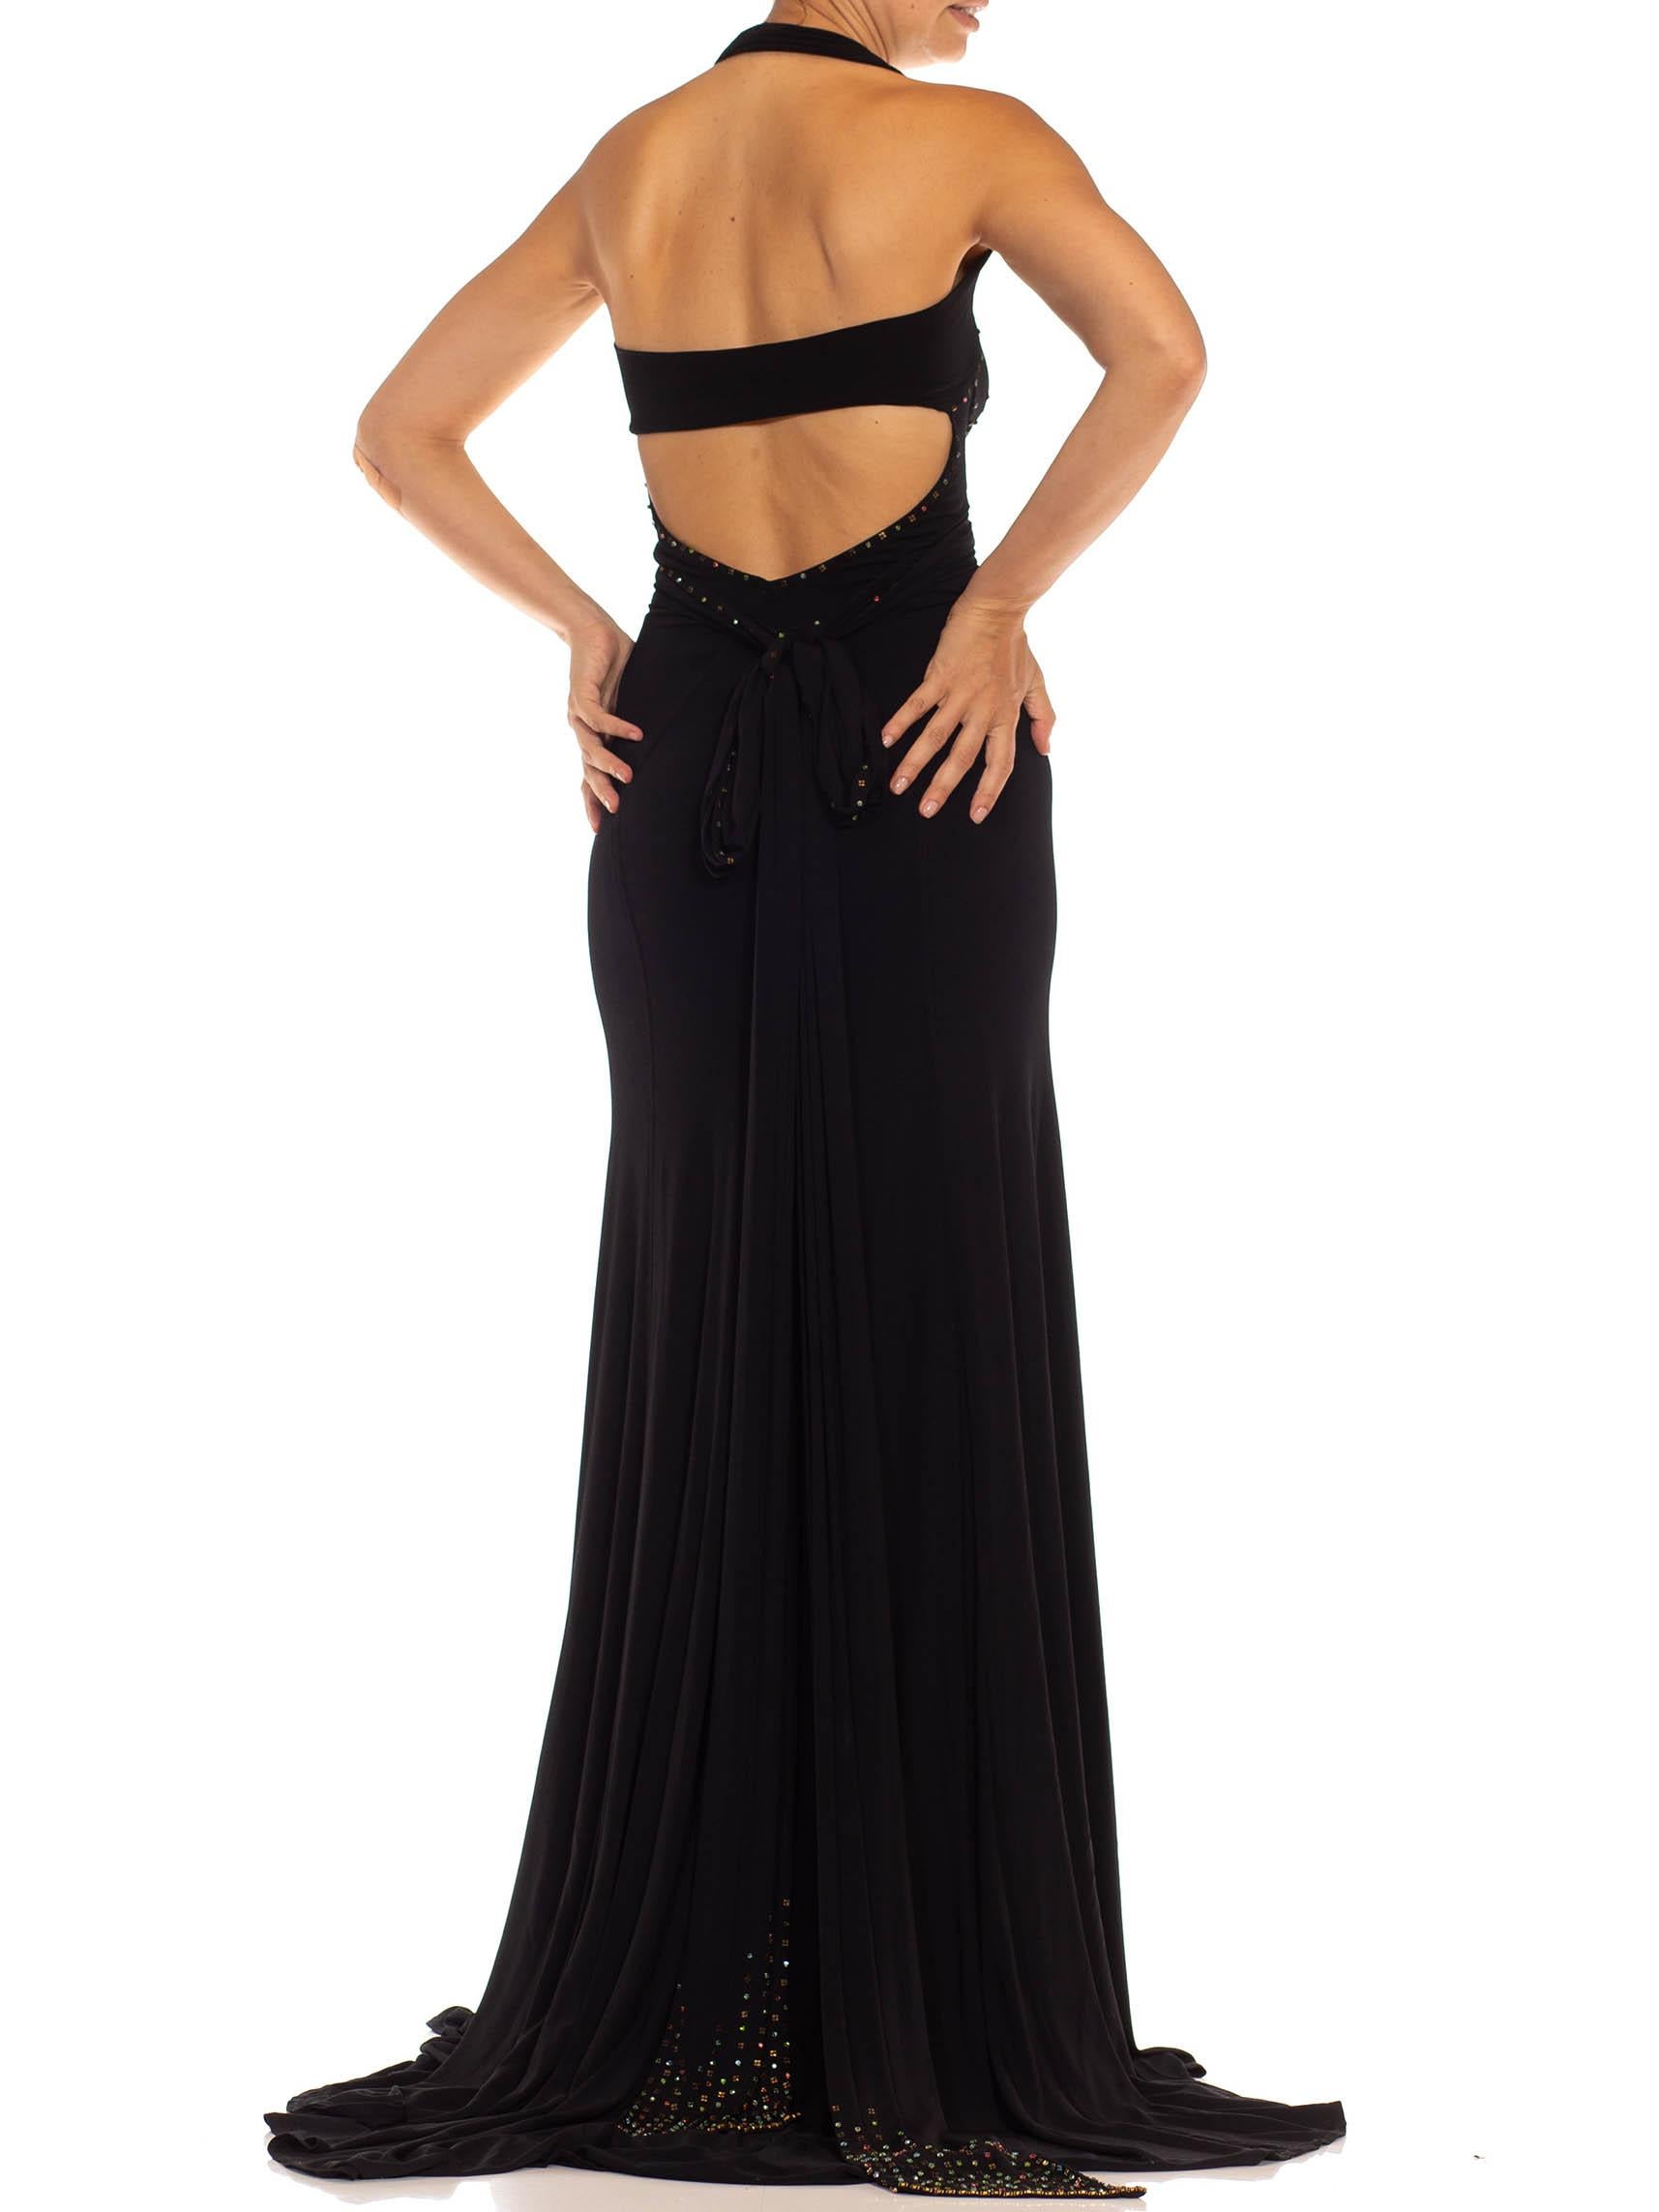 1990S Black Jersey Sexy Slinky Rhinestone Halter Neck Gown With Arm Sleeve Piece For Sale 5